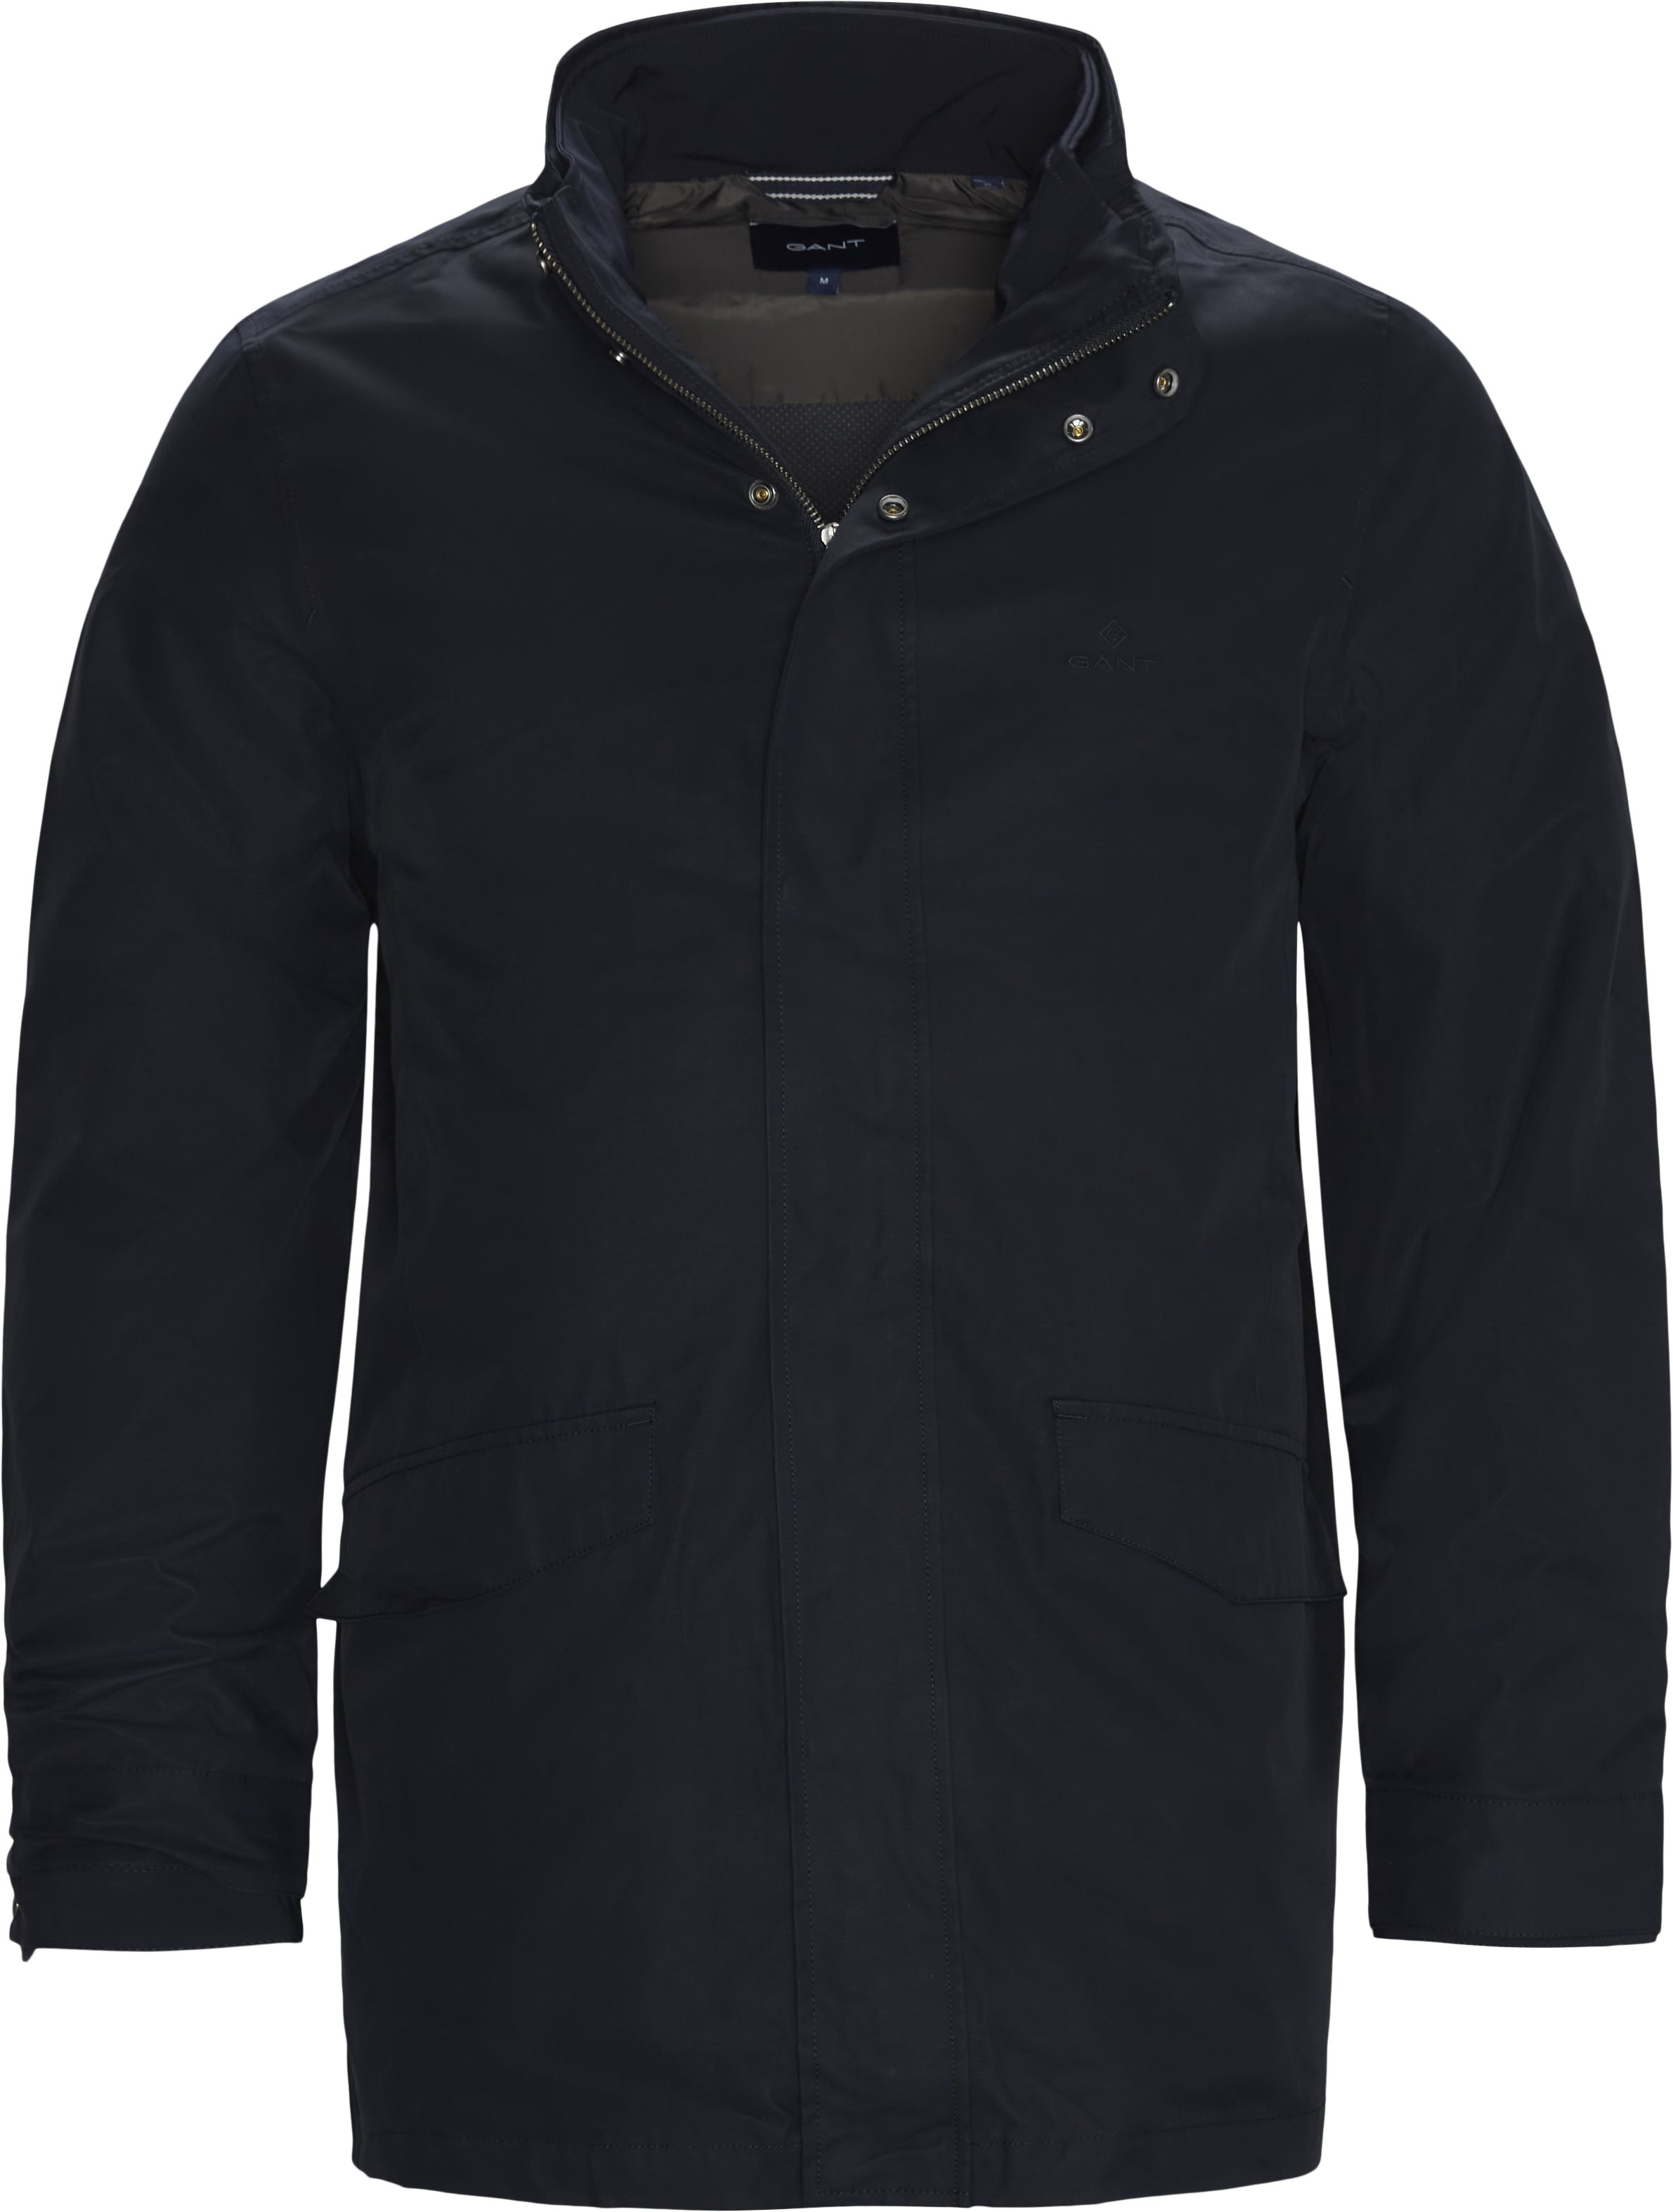 7006115 THE GANT DOUBLE JACKET Jackets NAVY from Gant 363 EUR